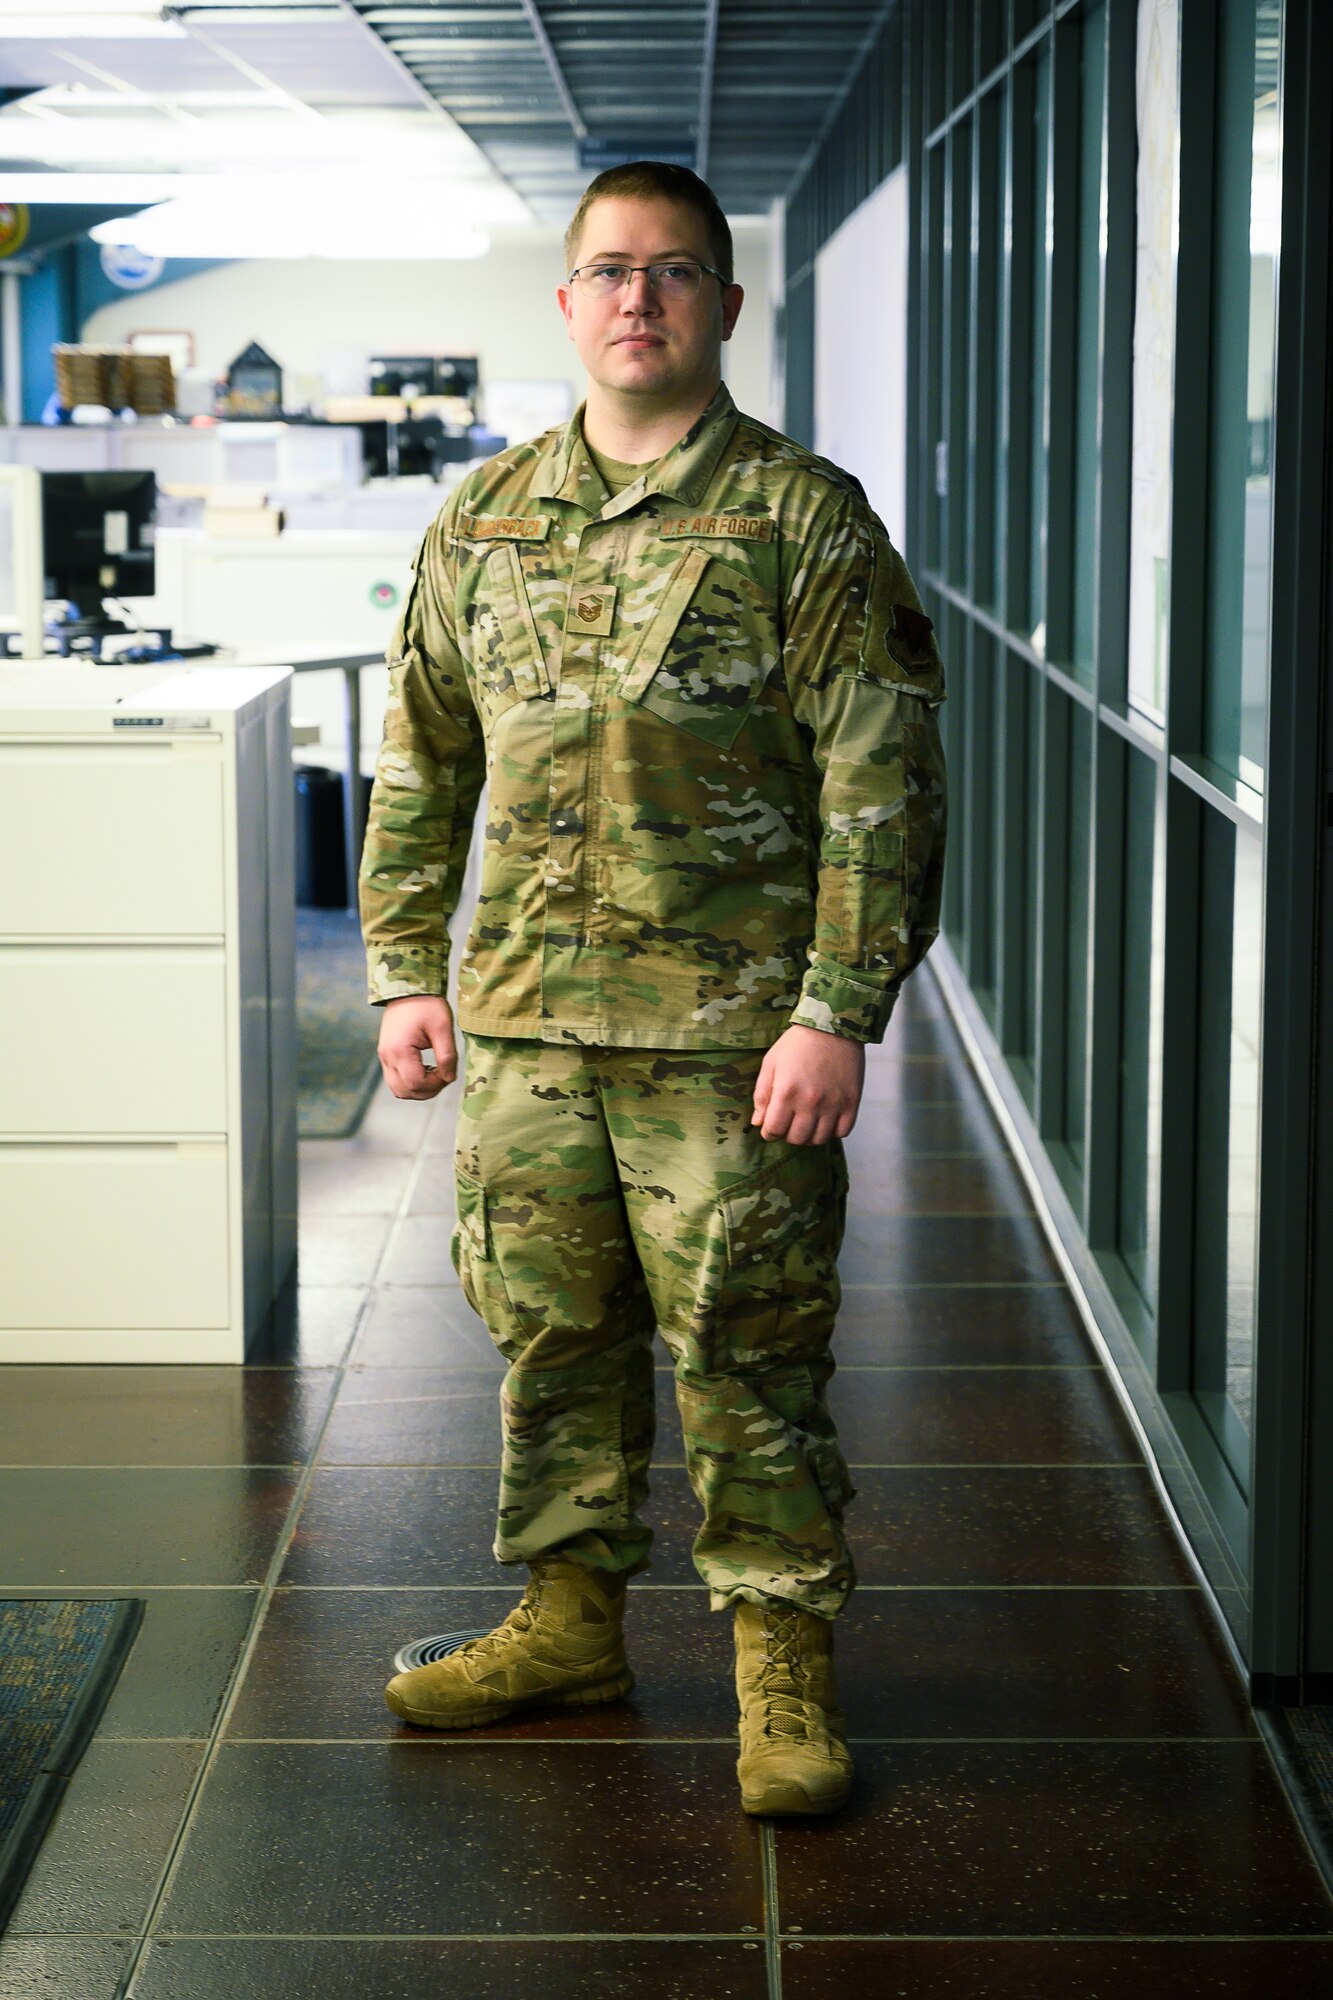 U.S. Air Force Master Sgt. Brandon Louderback, a 188th CES engineer assistant, March 4, 2020, at Ebbing Air National Guard base, Fort Smith, Ark. Louderback is pushing for greater Geographic Information System (GIS) integration in the Air National Guard after showcasing its ability to reduce manpower to assess damage after an EF-1 tornado tore through the base in 2019. (U.S. Air National Guard photo by Staff Sgt. Matthew Matlock)